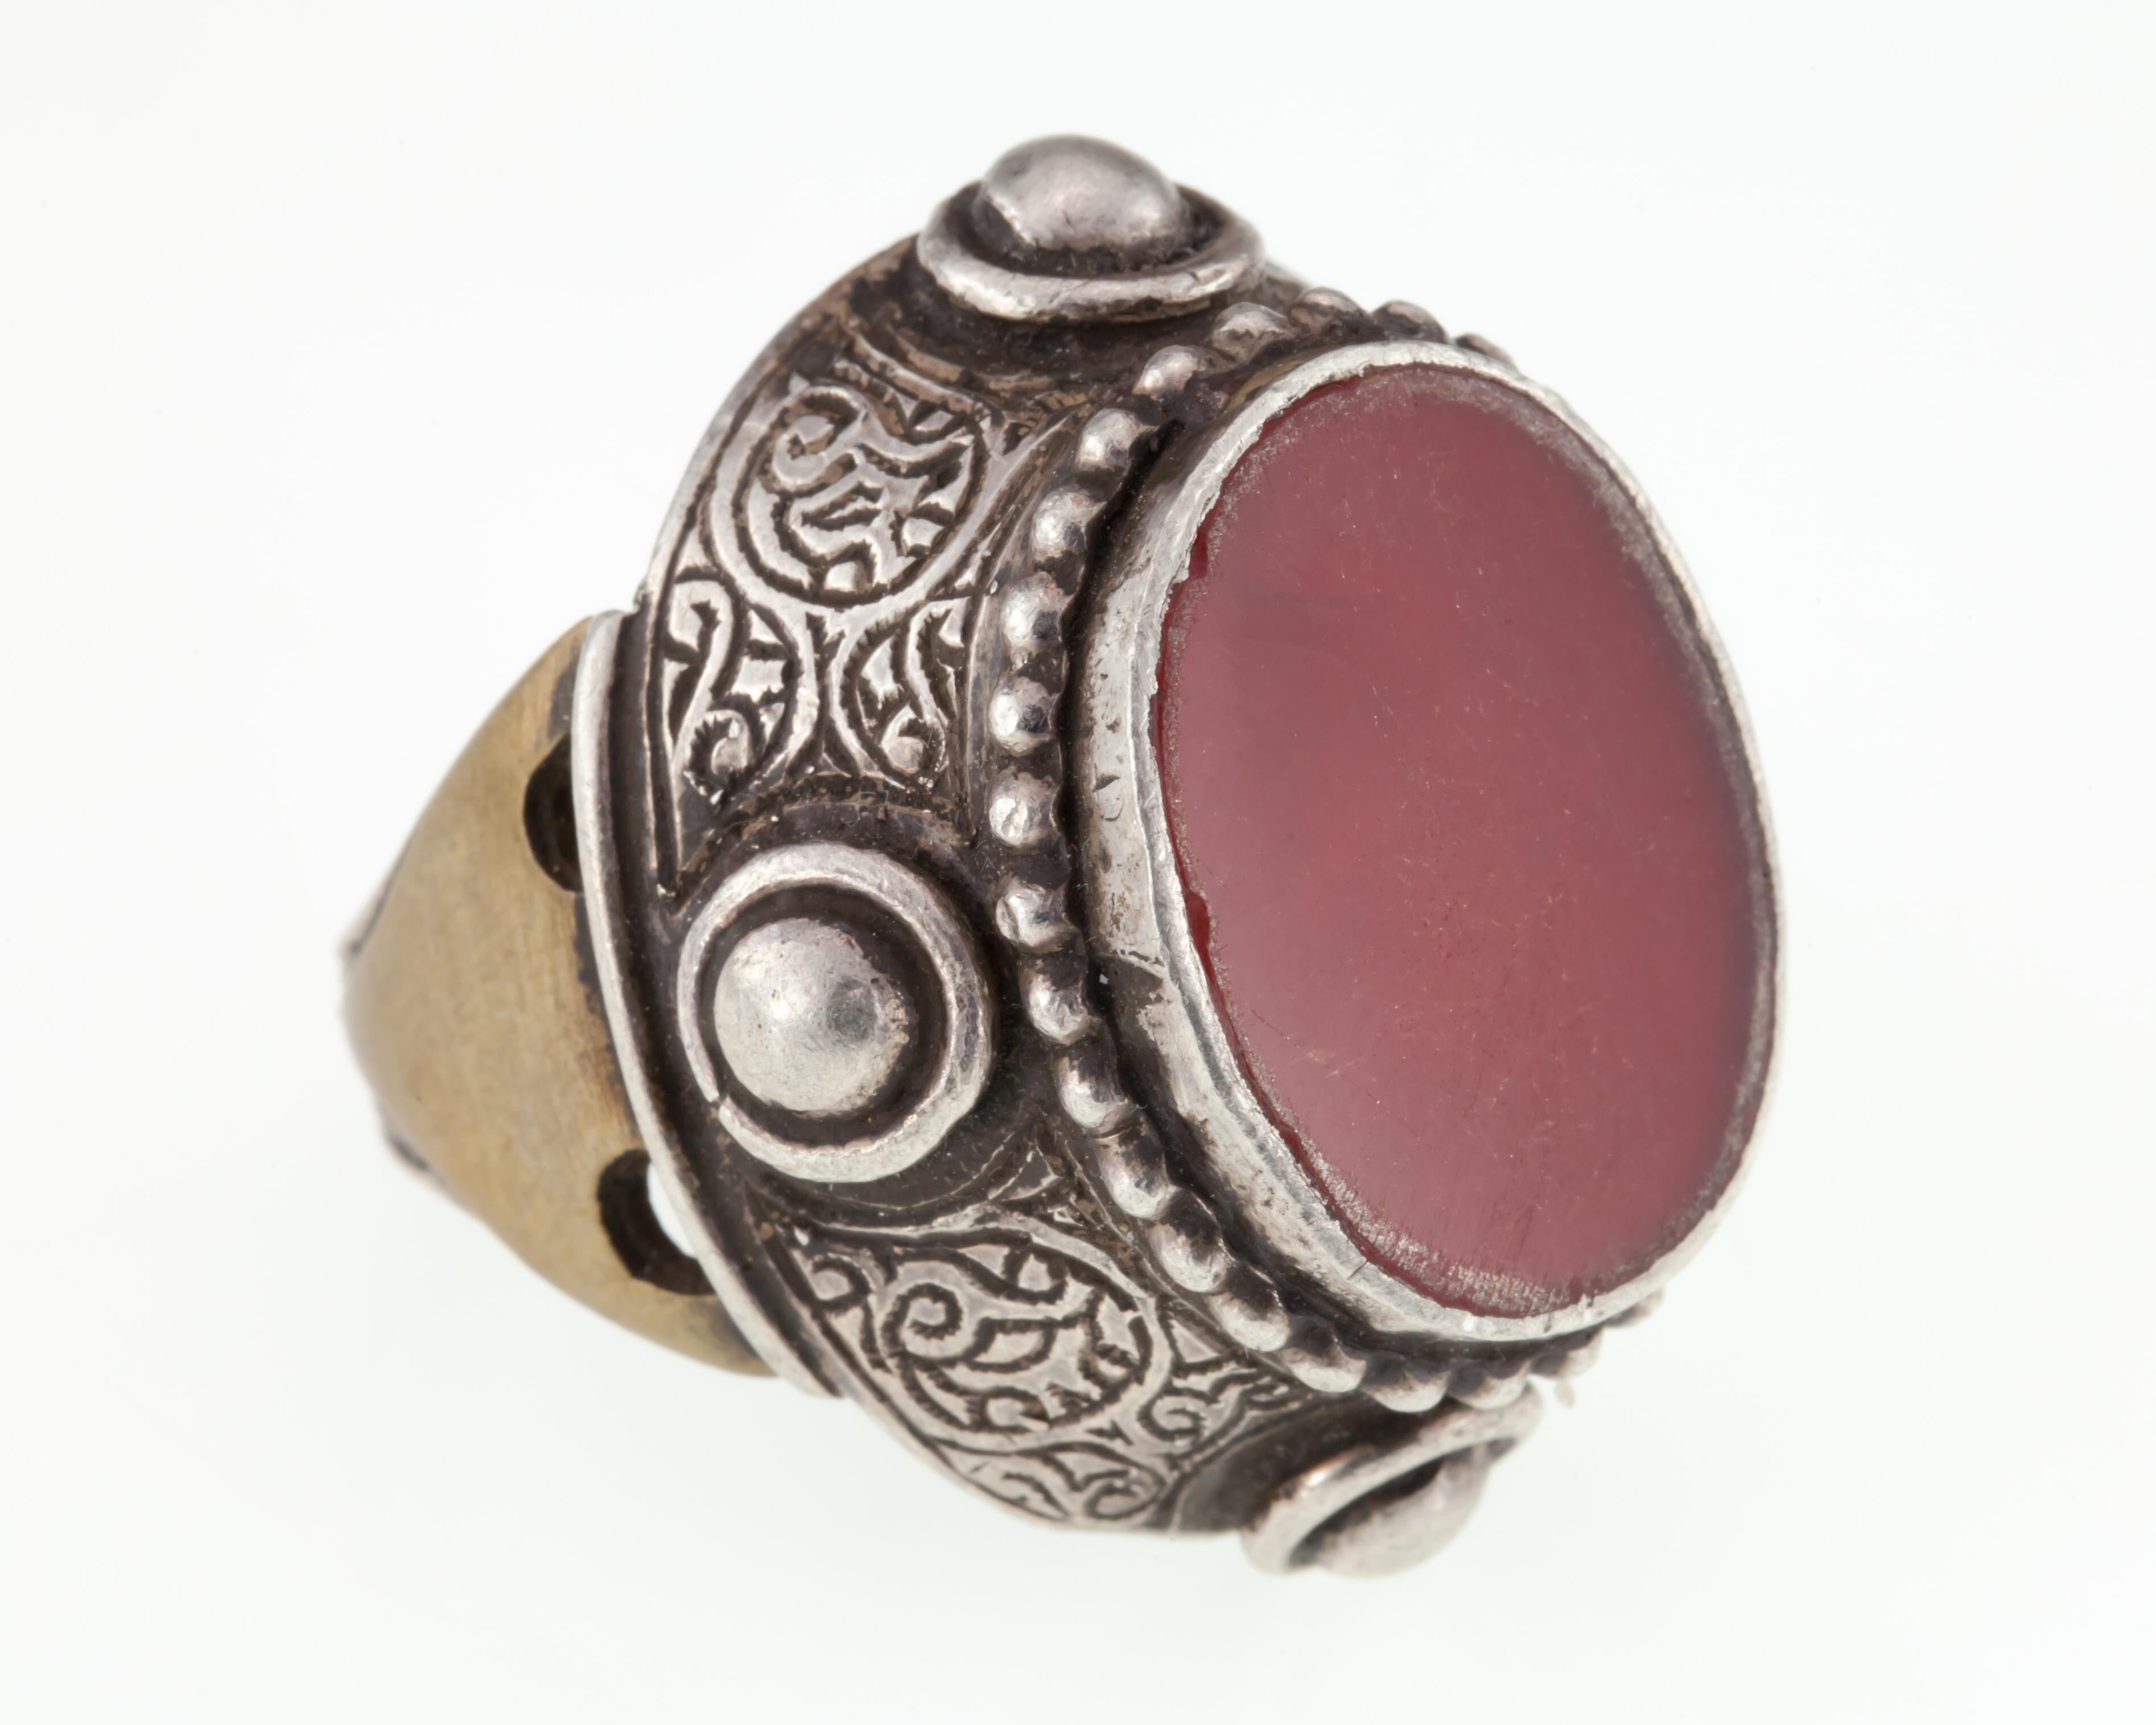 Gorgeous Silver and Brass Afghan Ring
Features Flat Carved Carnelian Stone
Nice Stud and Etched Detailing with Antiqued Accents
Dimensions of Stone = 20 mm x 15 mm
Dimensions of Plaque = 32 mm x 27 mm
Total Mass = 27.4 grams
Gorgeous Ring!